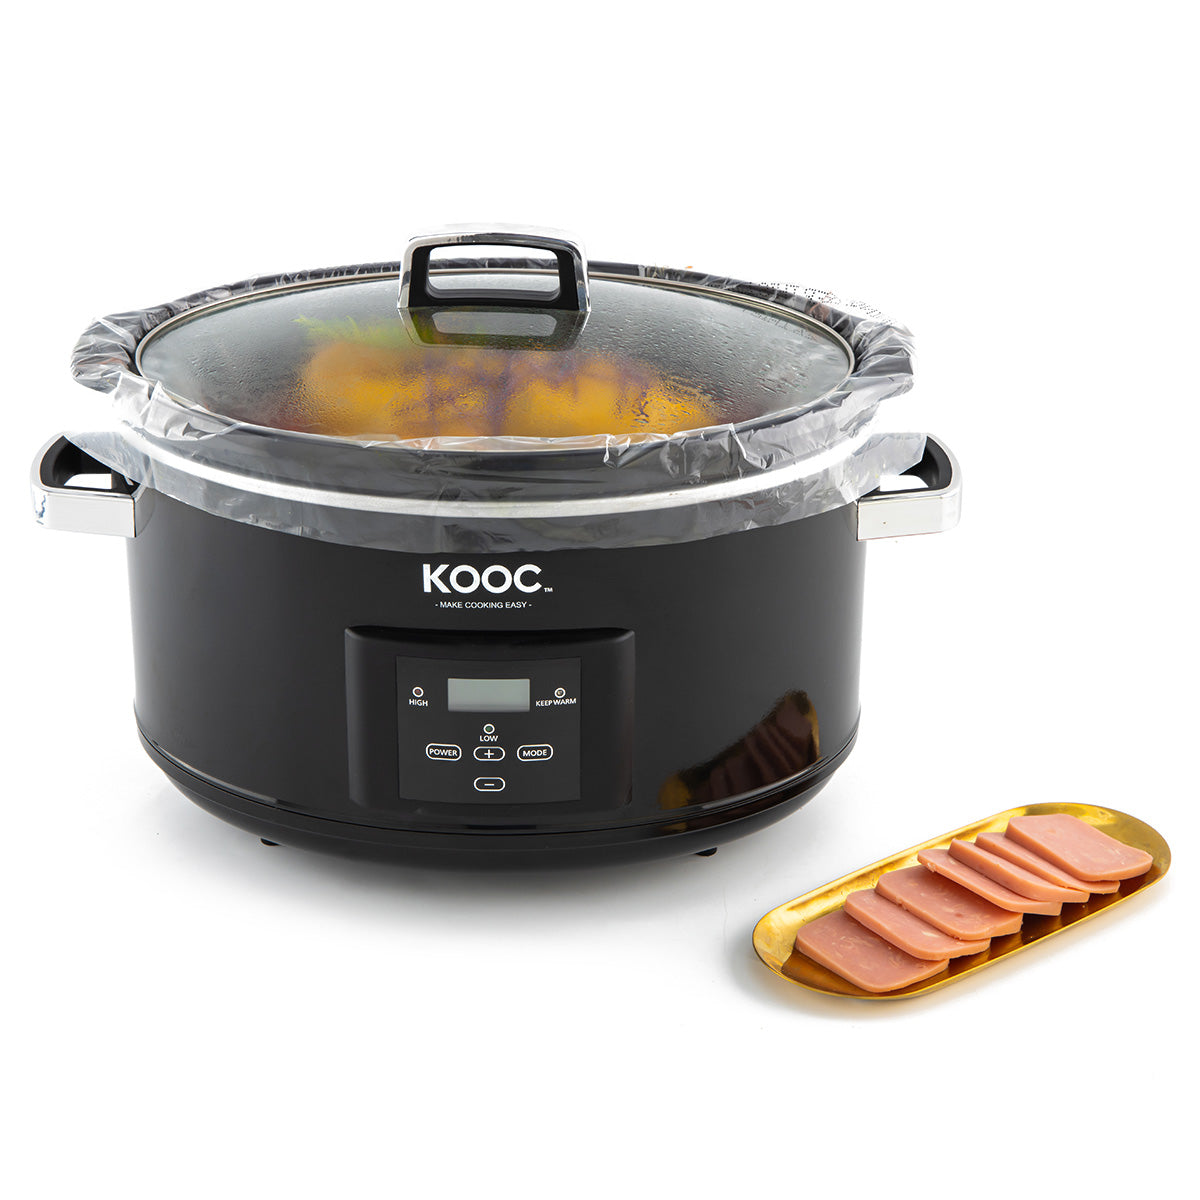 KOOC 10-in-1 Electric Dutch Oven, 6-Quart Blue, Slow Cook, Braise, Mea –  KOOC Official